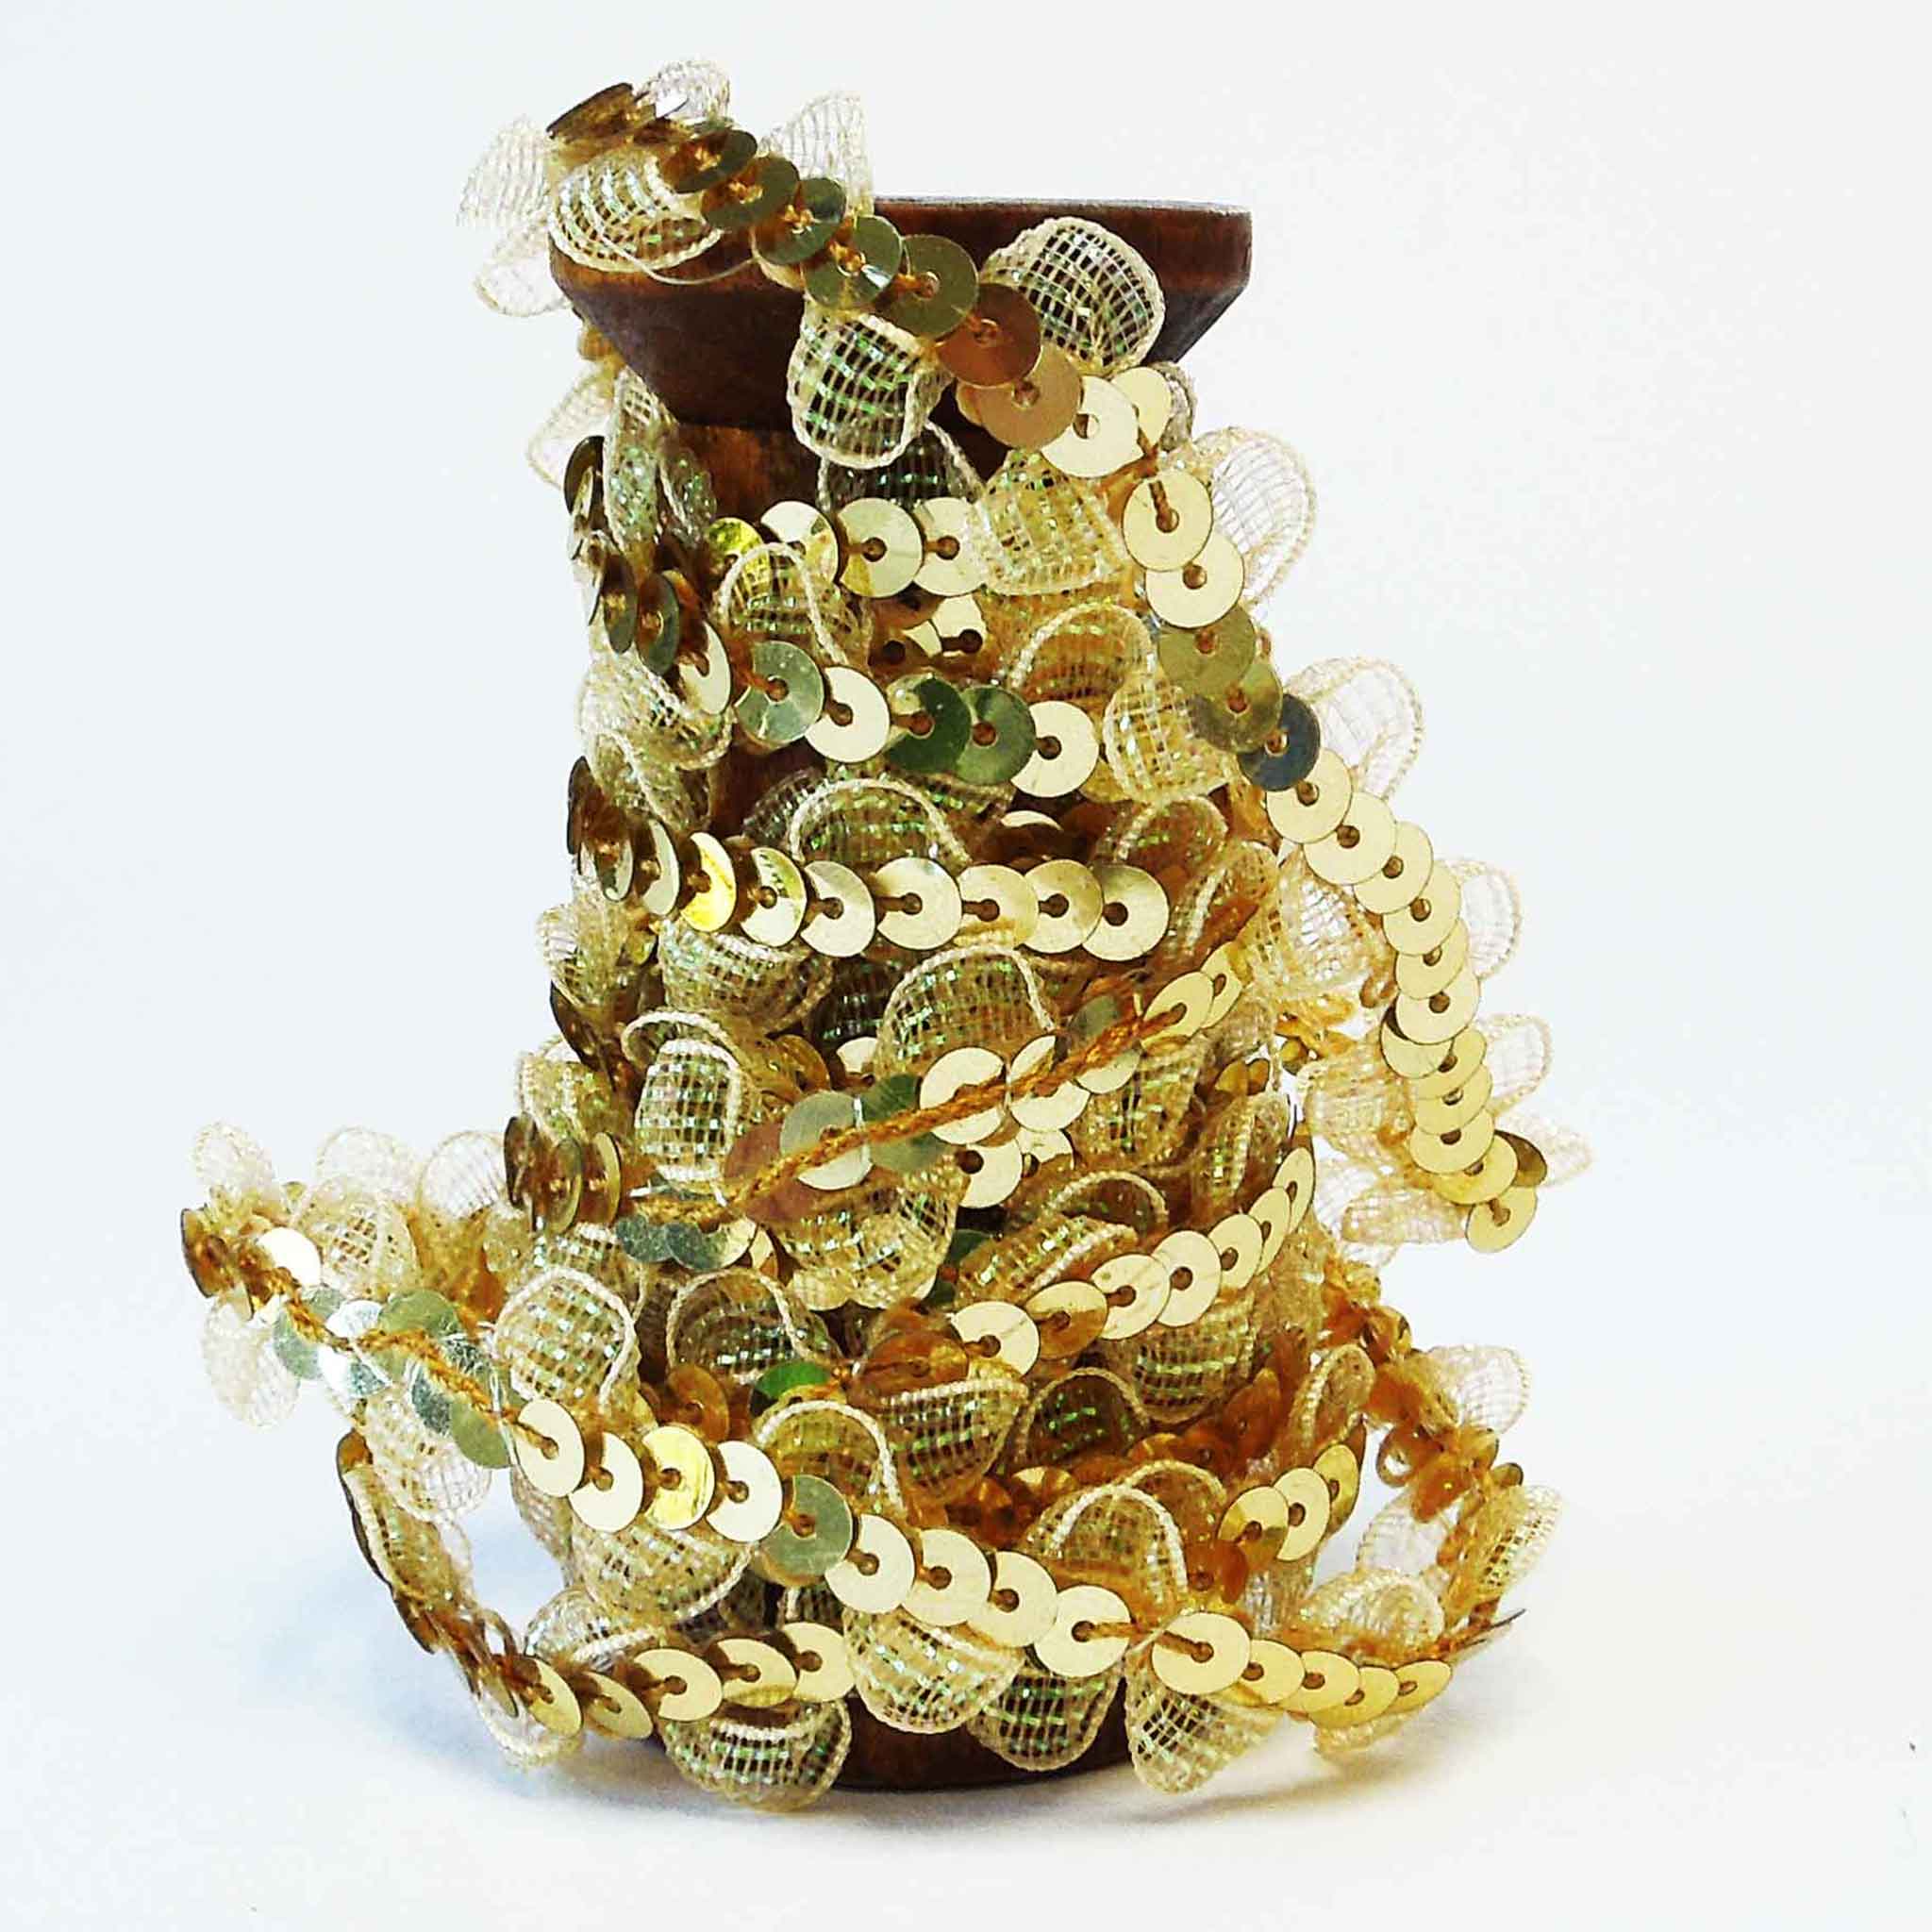 15mm Sequins and Organza Trim - Gold - Wooden Spool - 2 Metres